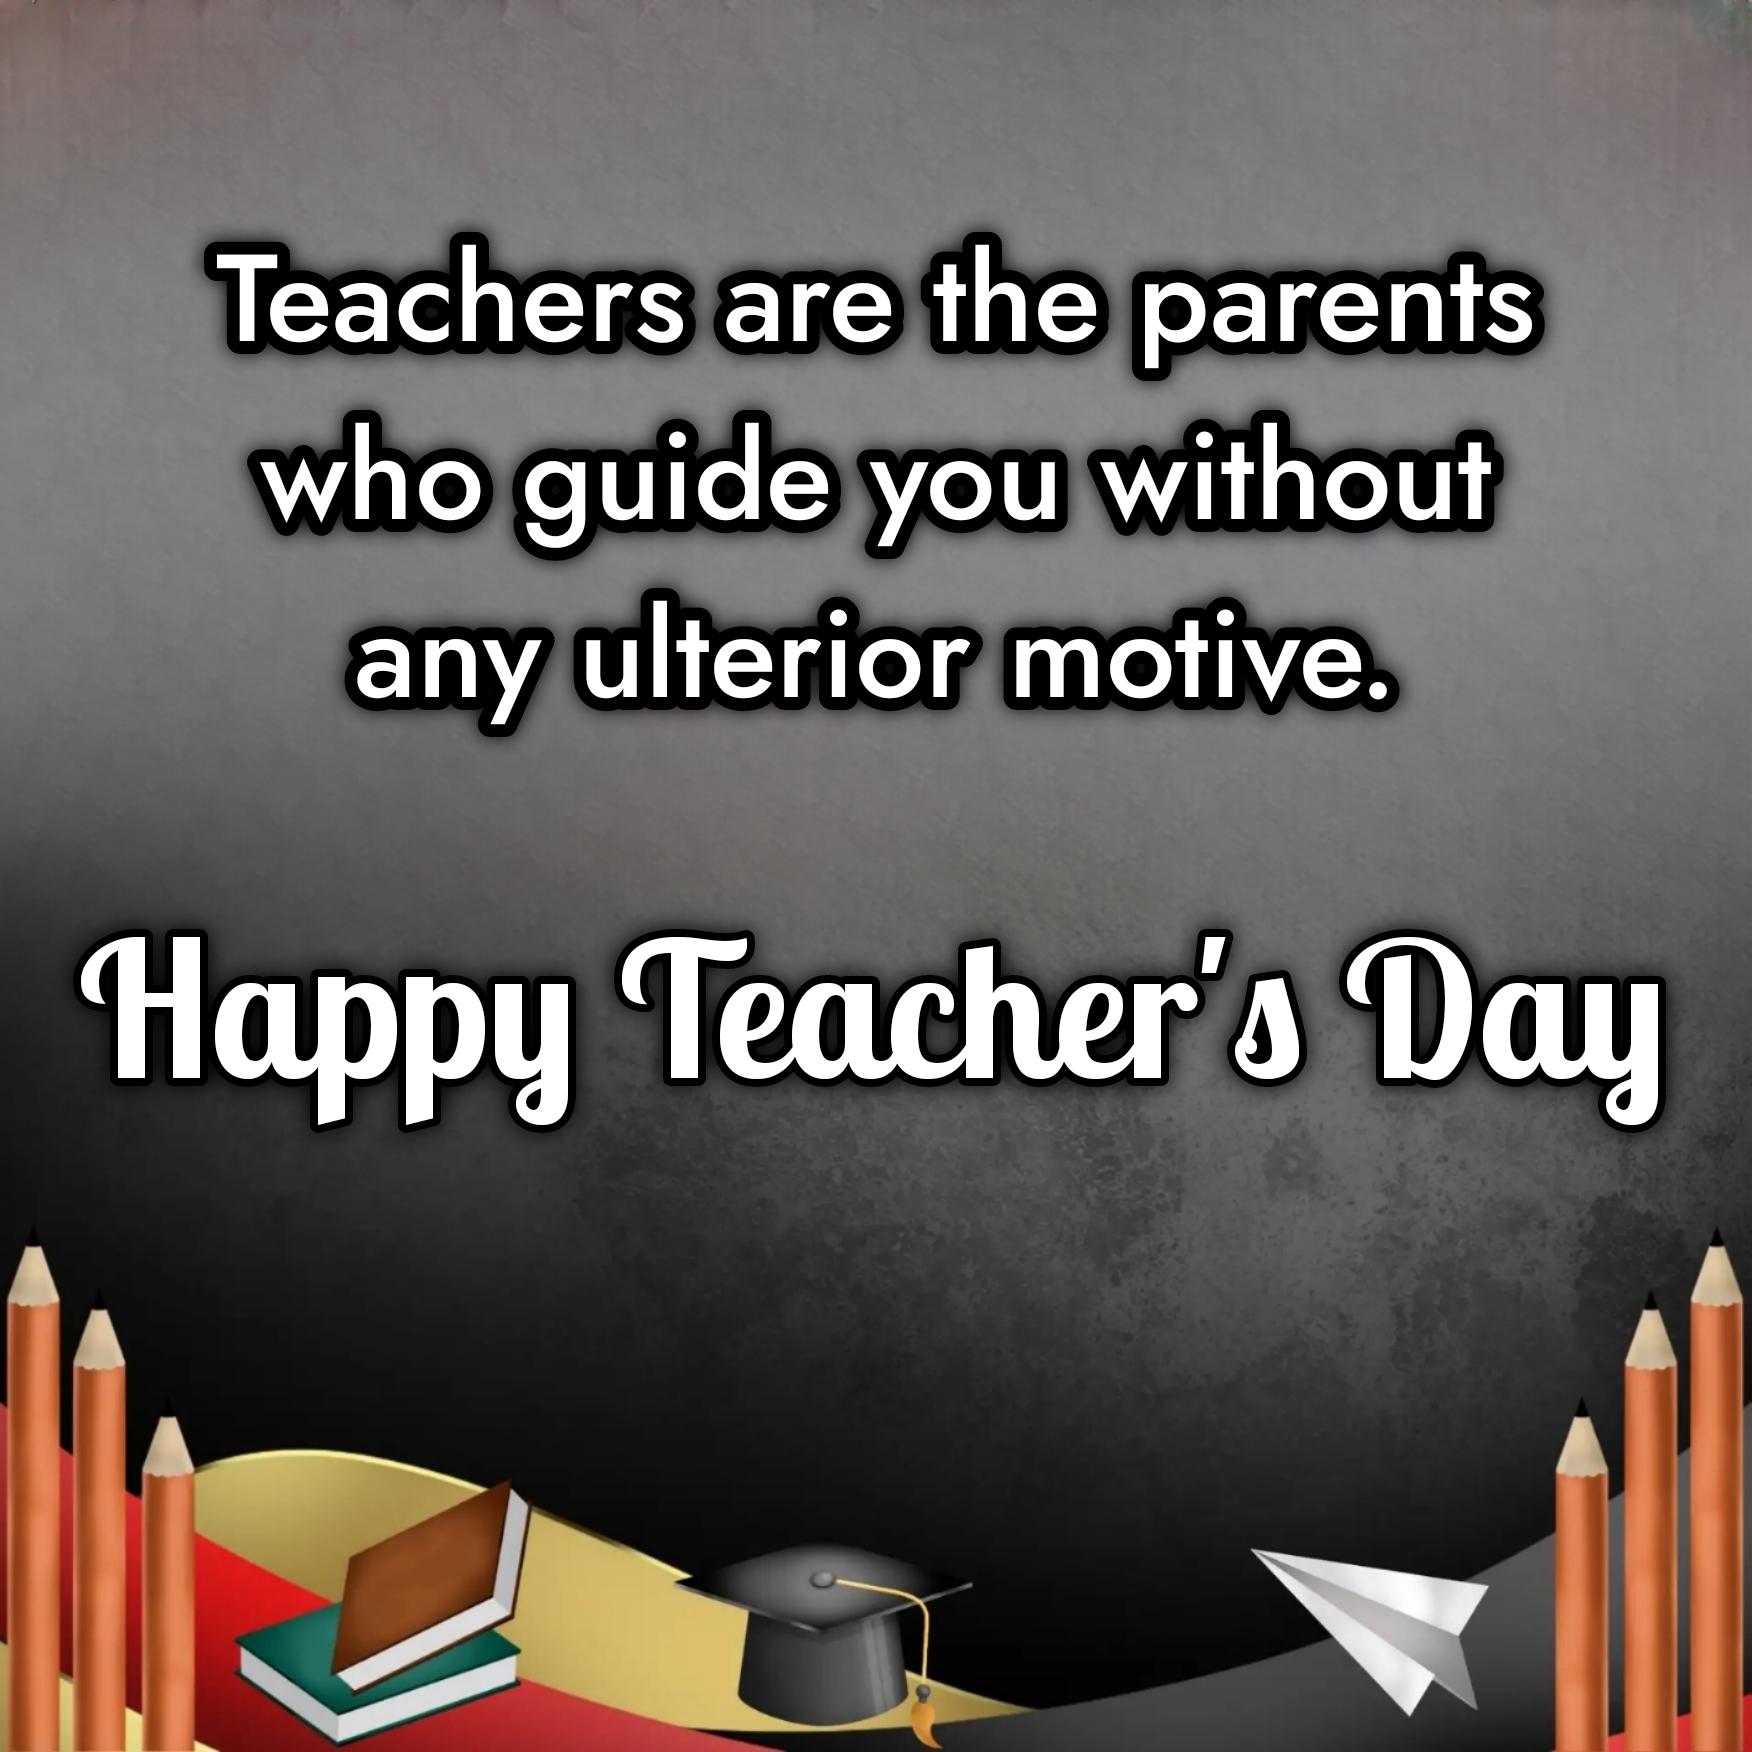 Teachers are the parents who guide you